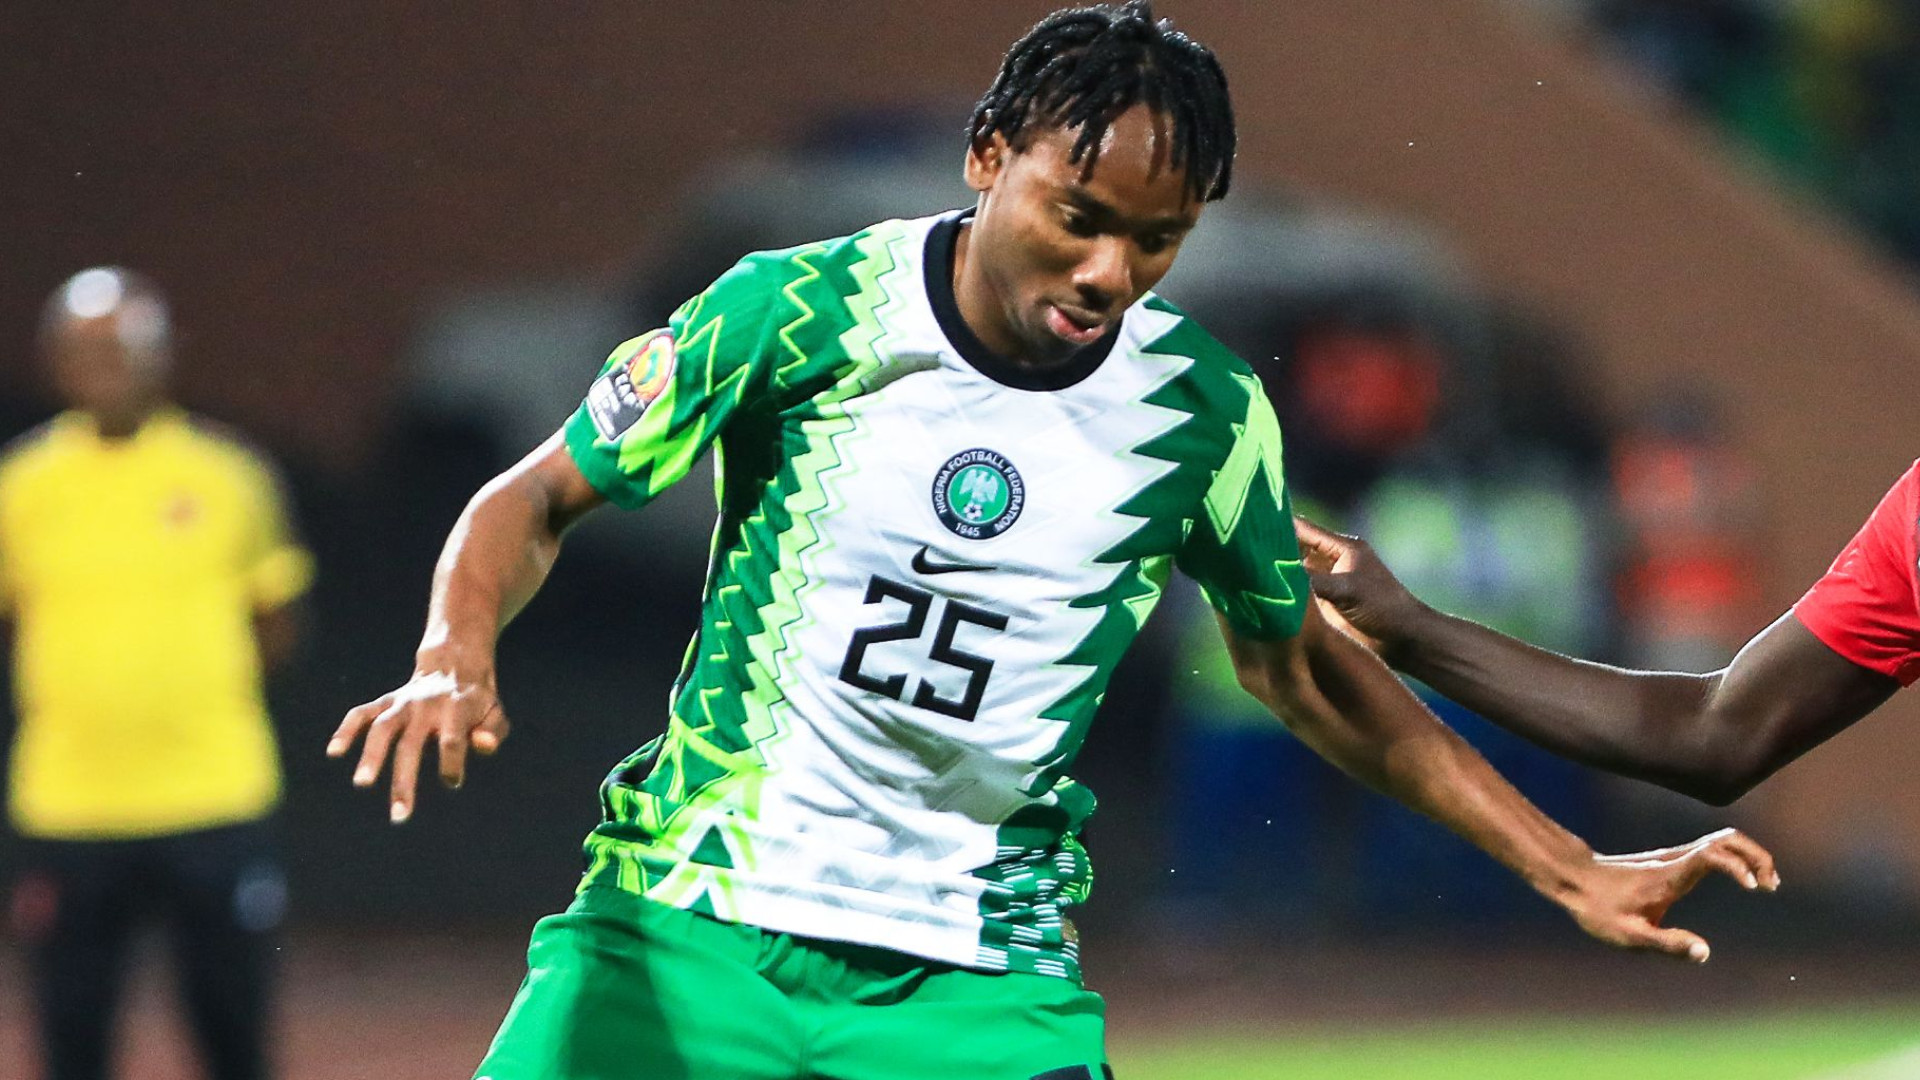 Malicious and unfair!' – Kelechi Nwakali's brother rubbishes FC Zurich transfer rumours | Goal.com Nigeria